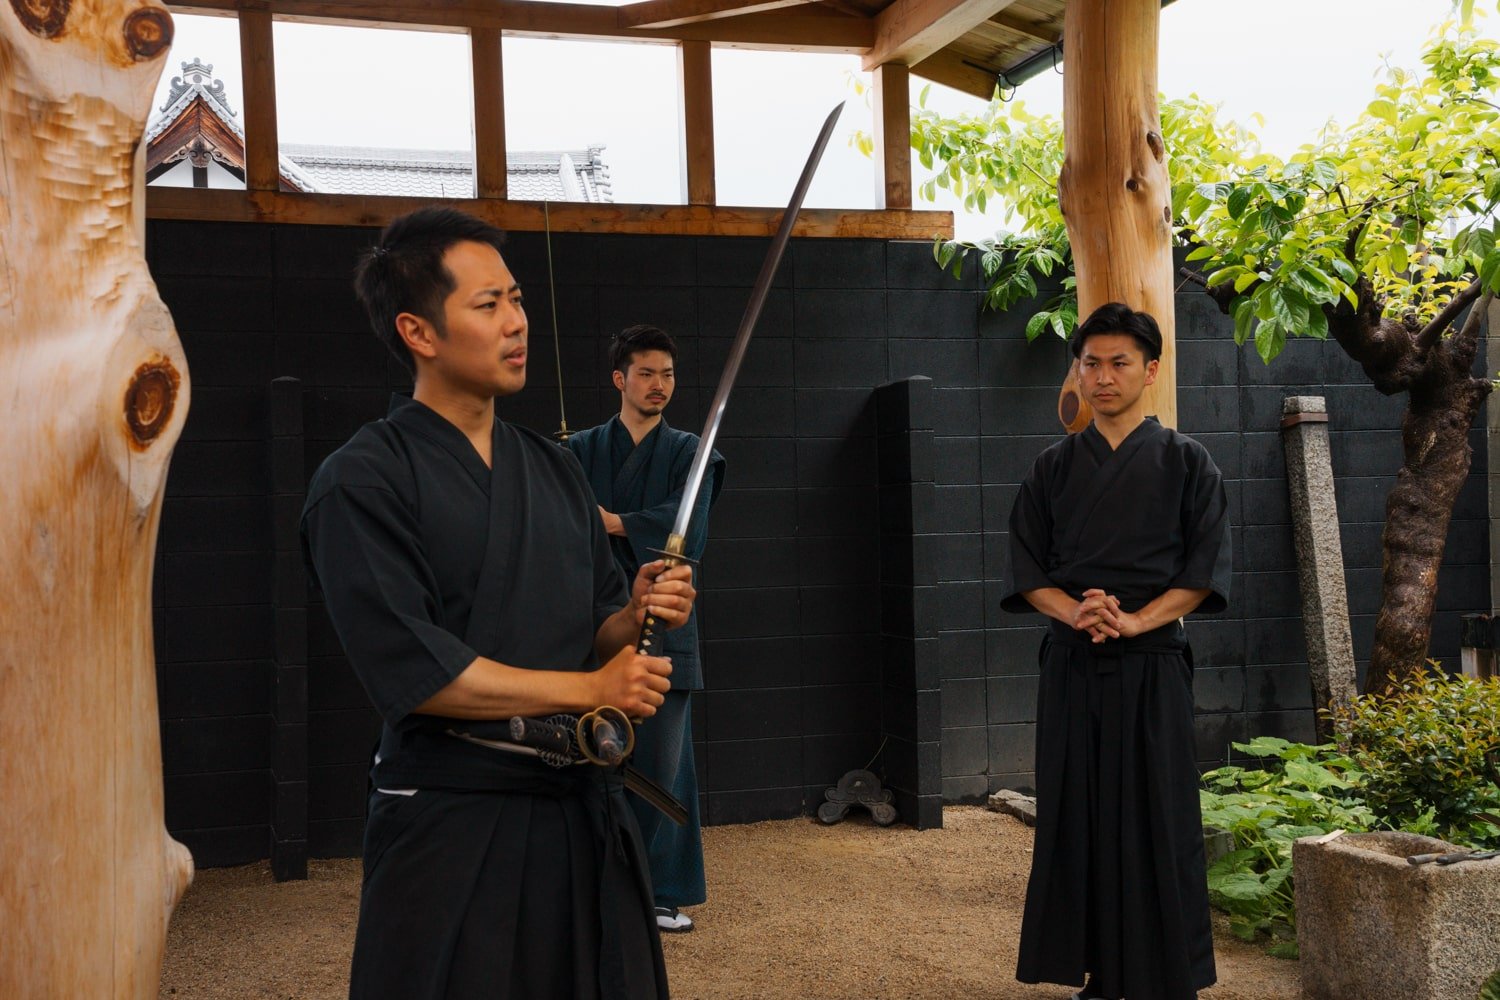 The expert katana sword instructors giving instructions for tourists on the Kyoto Samurai Experience Tour in Japan.